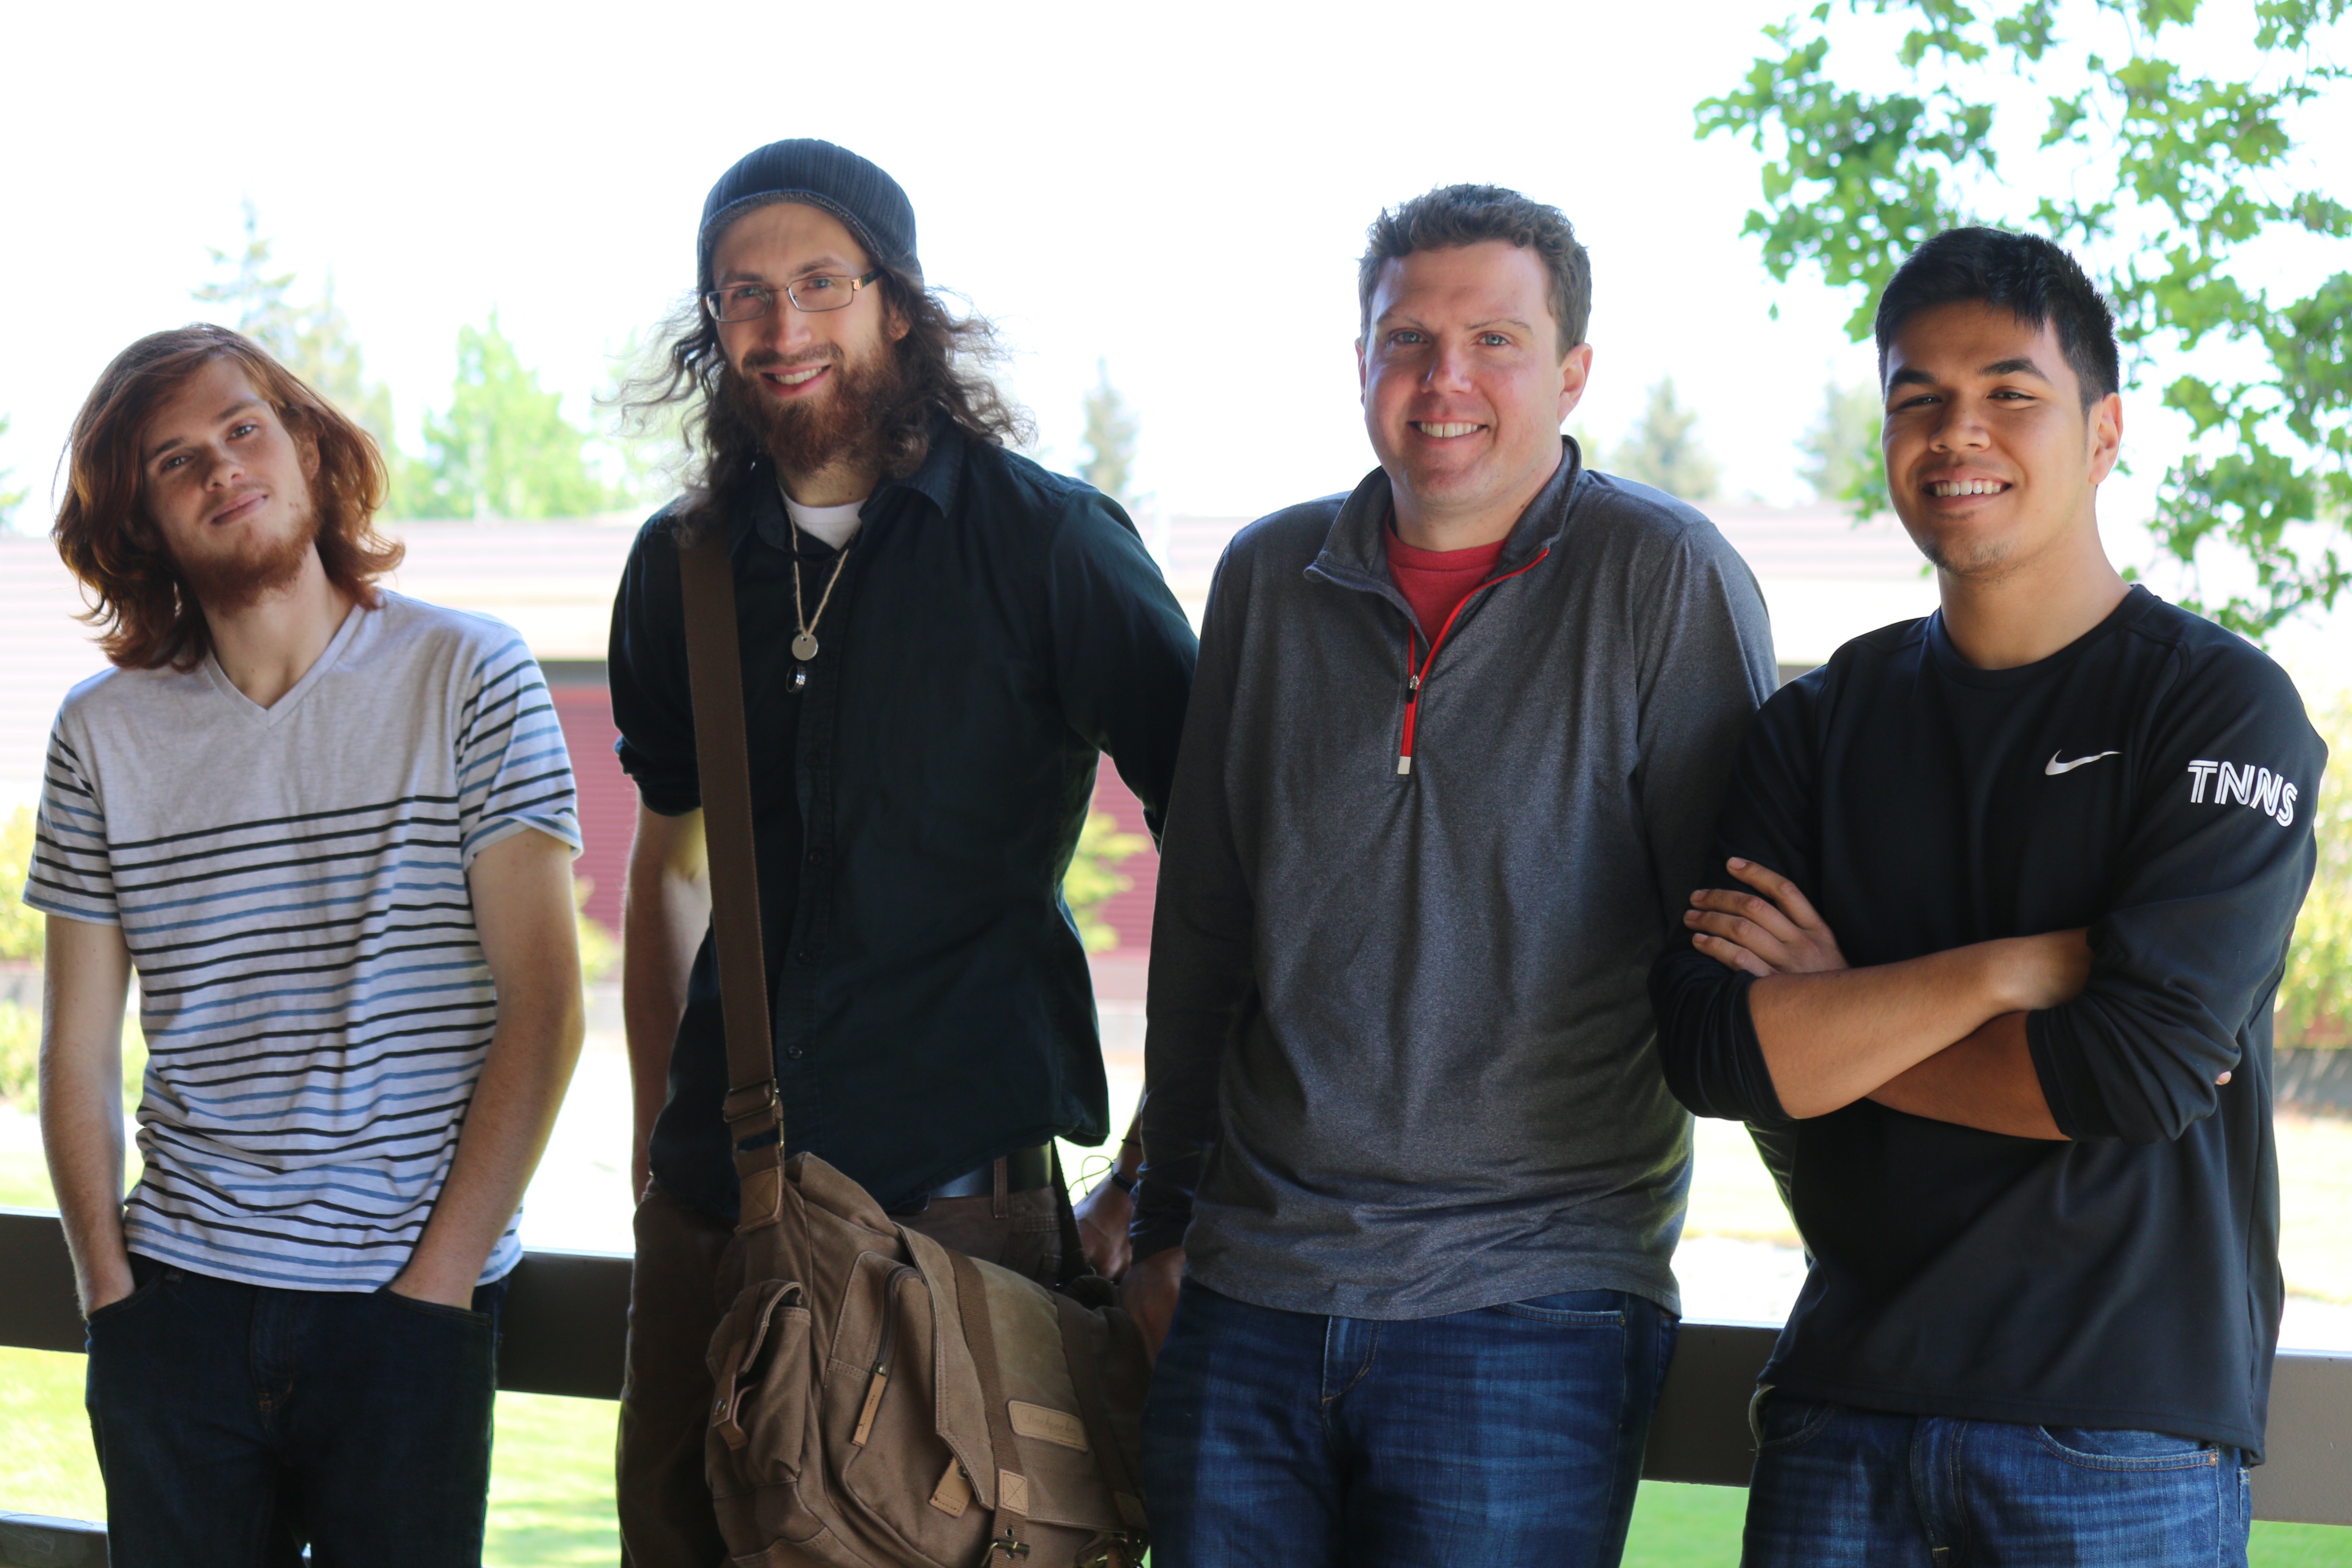 The "REFRACTION" film crew from left to right: Kuper Sletcha (producer), Chris Cook (writer), Bruce Stead (director and editor), and Jordan Tran (cinematographer). 